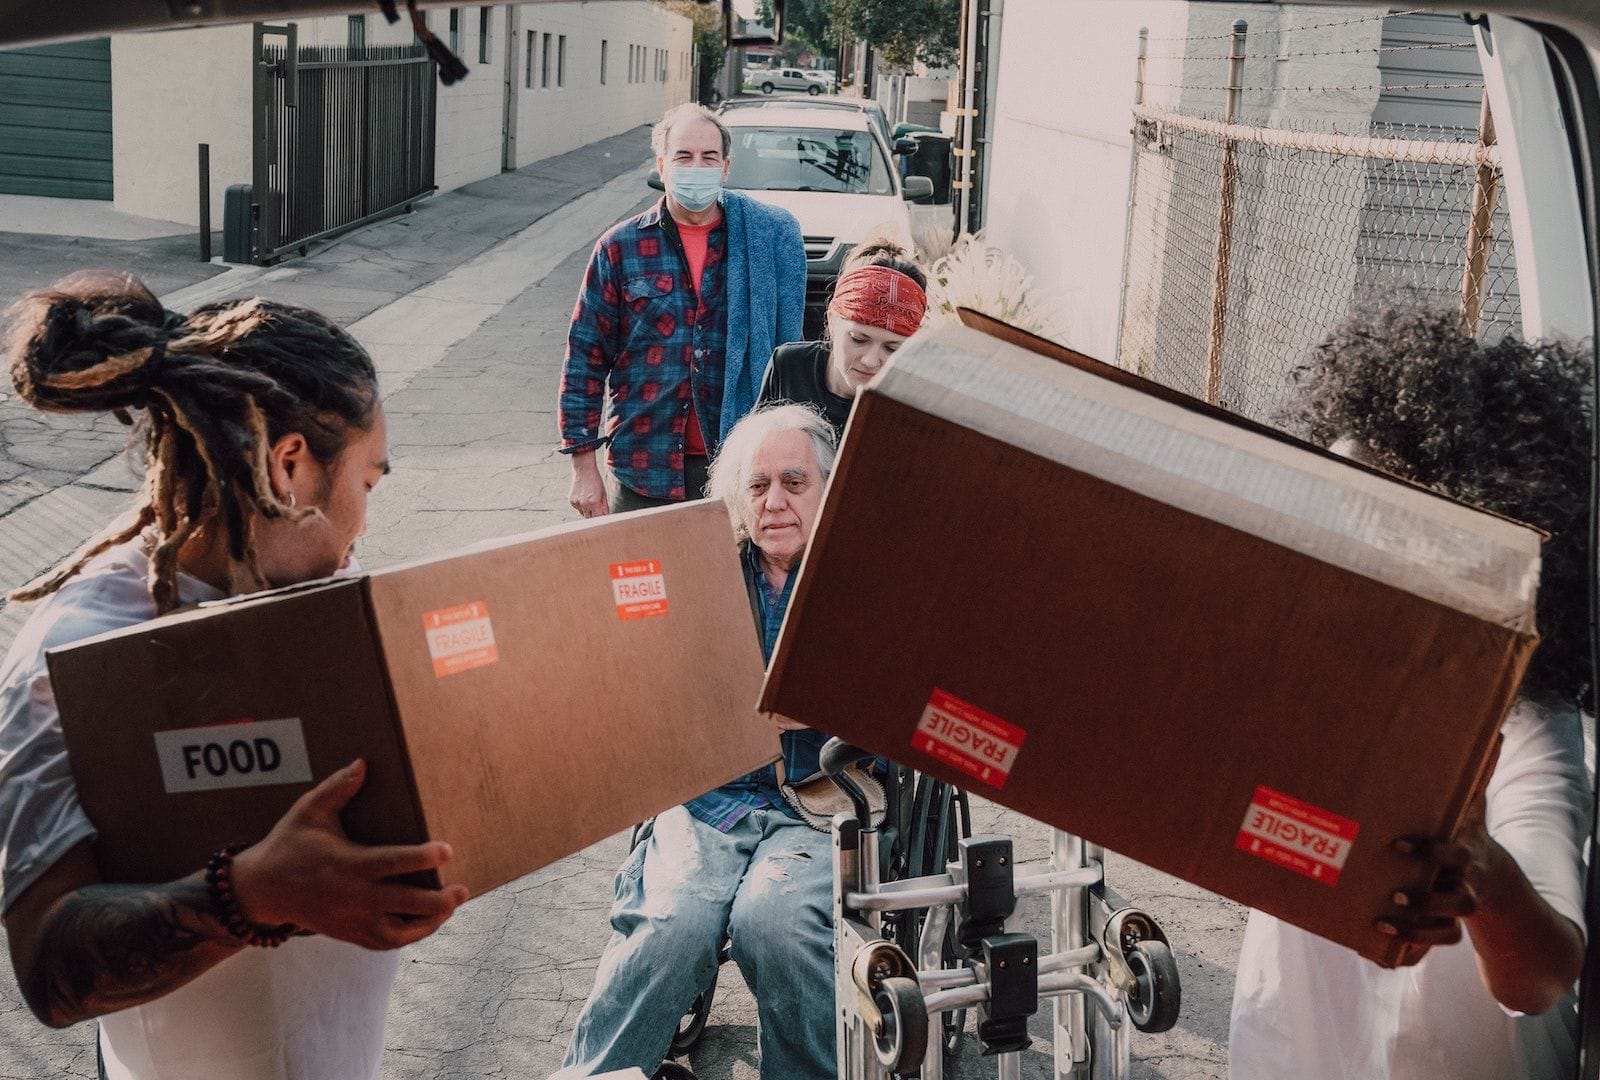 A group of volunteers unloading and handing boxes of food to an elderly individual in aa wheelchair.